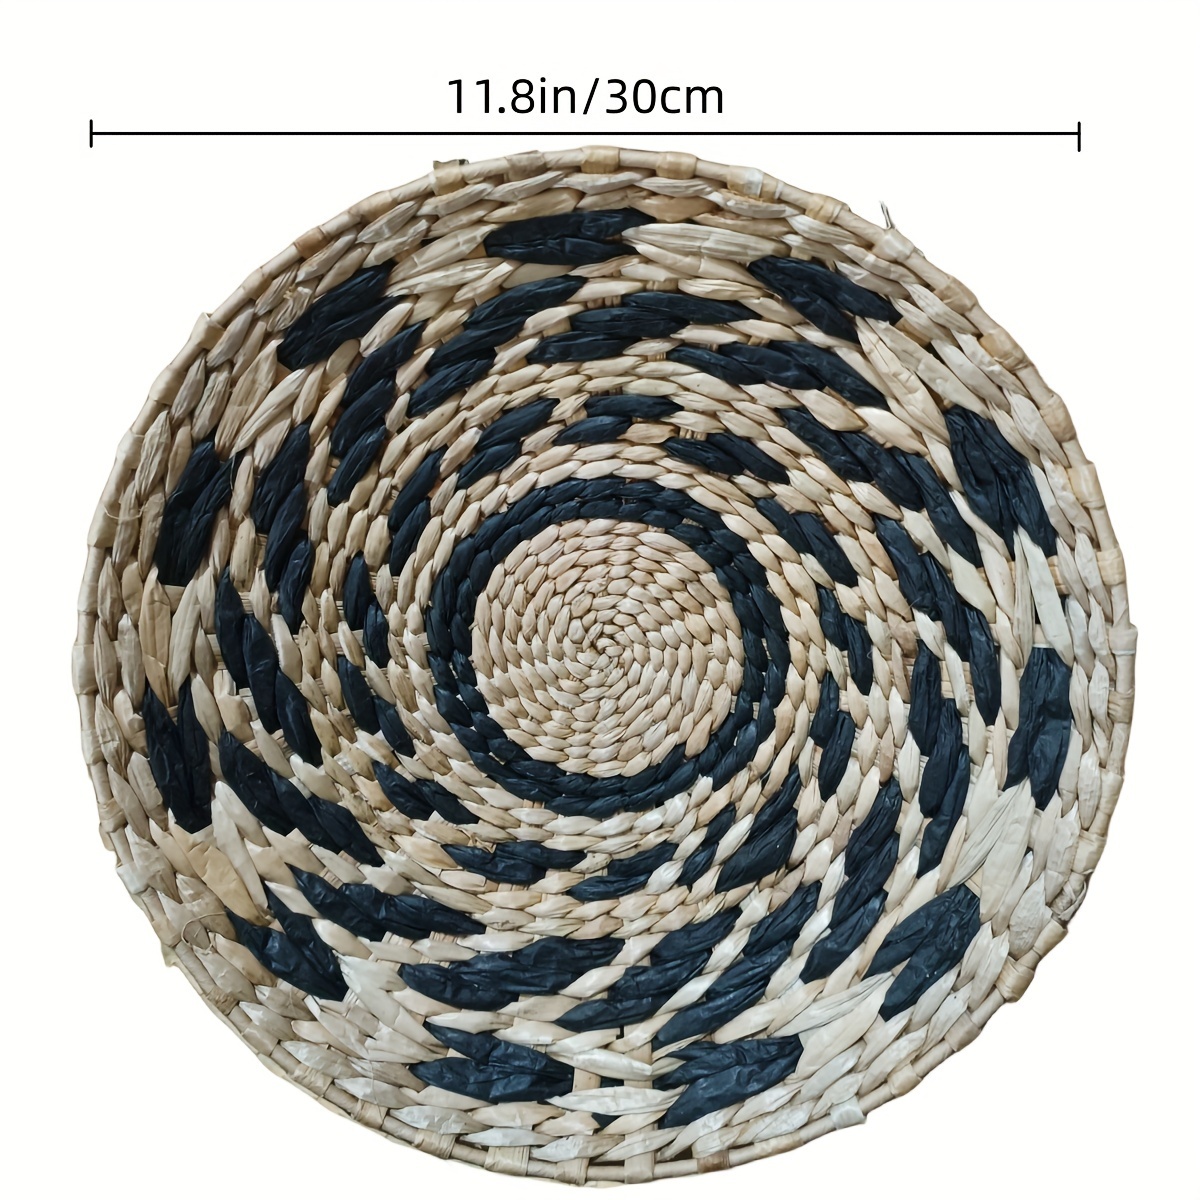 Hemp Rope Weaving Straw Crafts Hanging Pictures Wall Ornaments